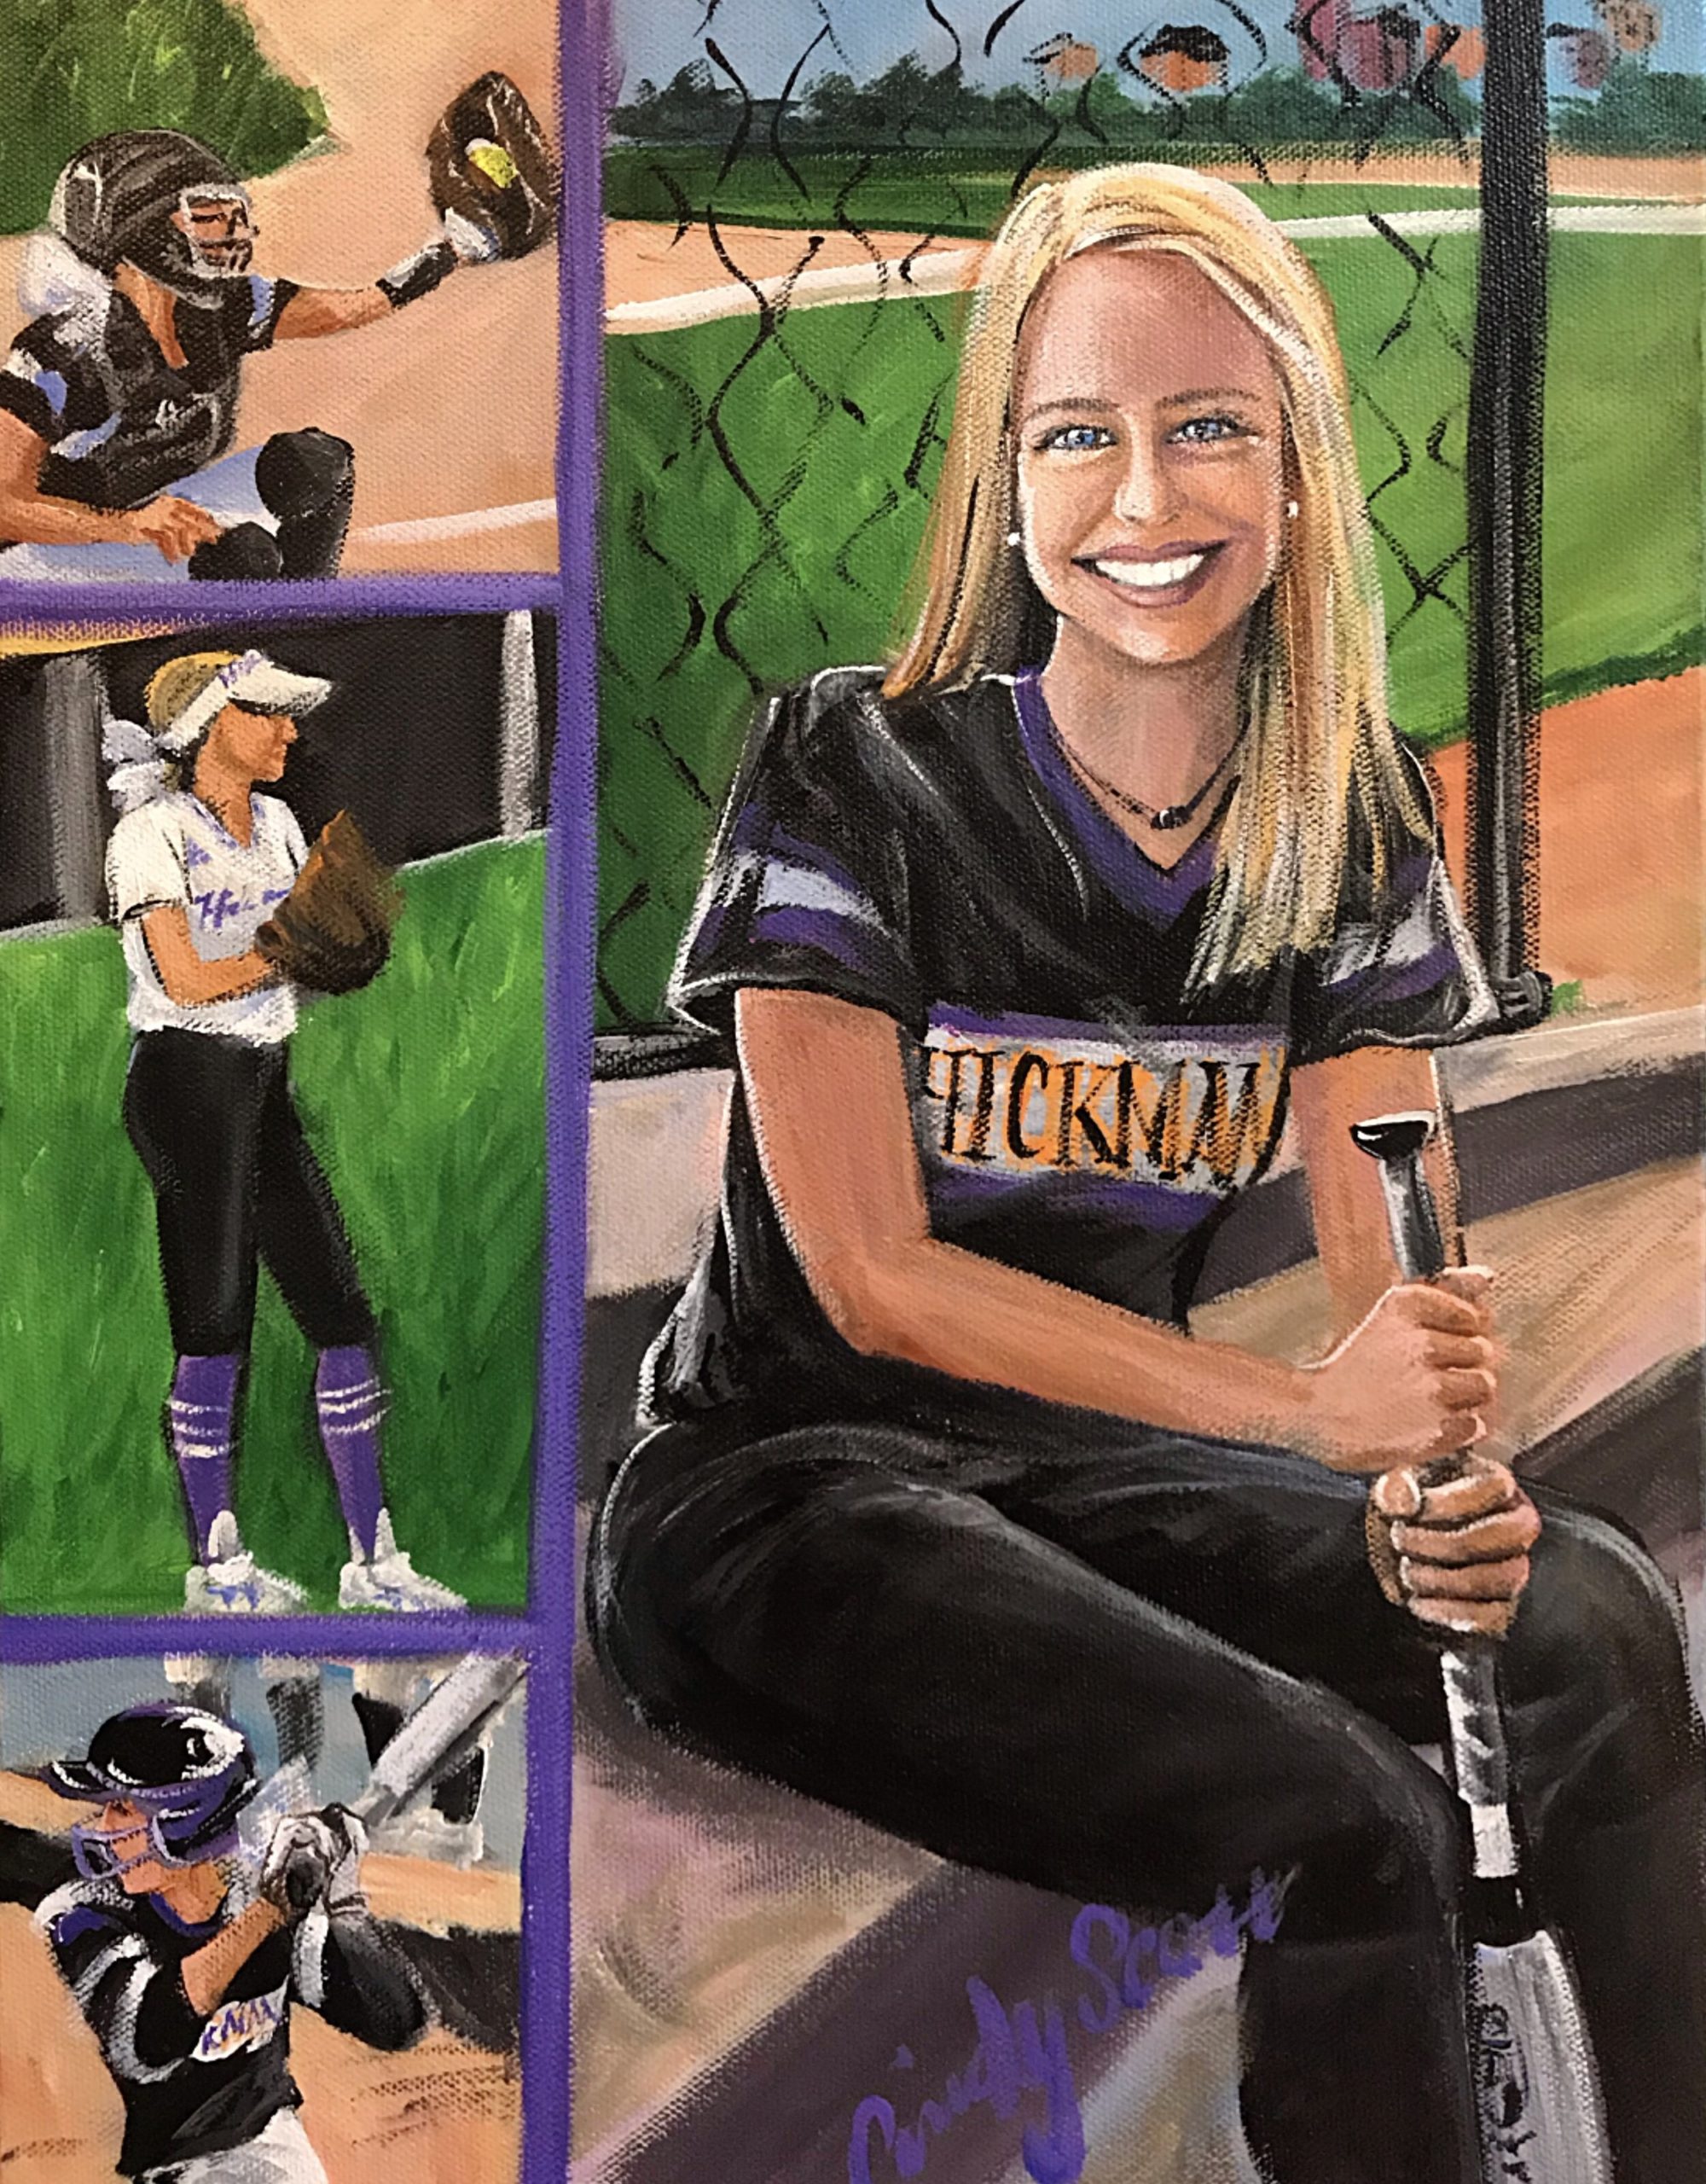 Painted from several photos to highlight the softball season for her senior year, canvas size 12x16